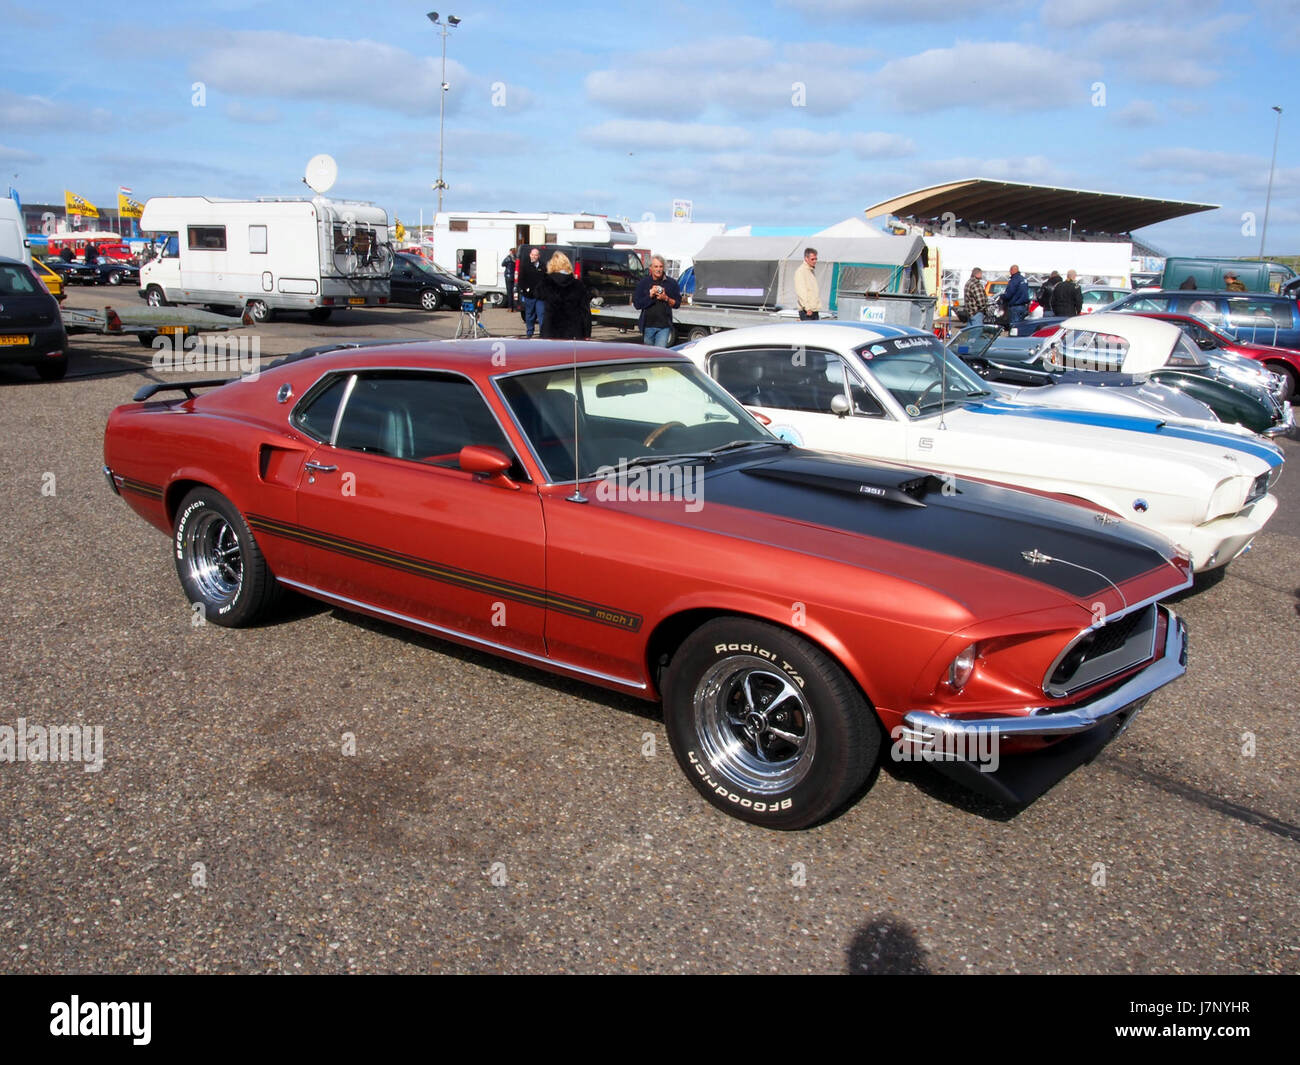 1969 Ford Mustang Mach 1 pic3 Stock Photo - Alamy